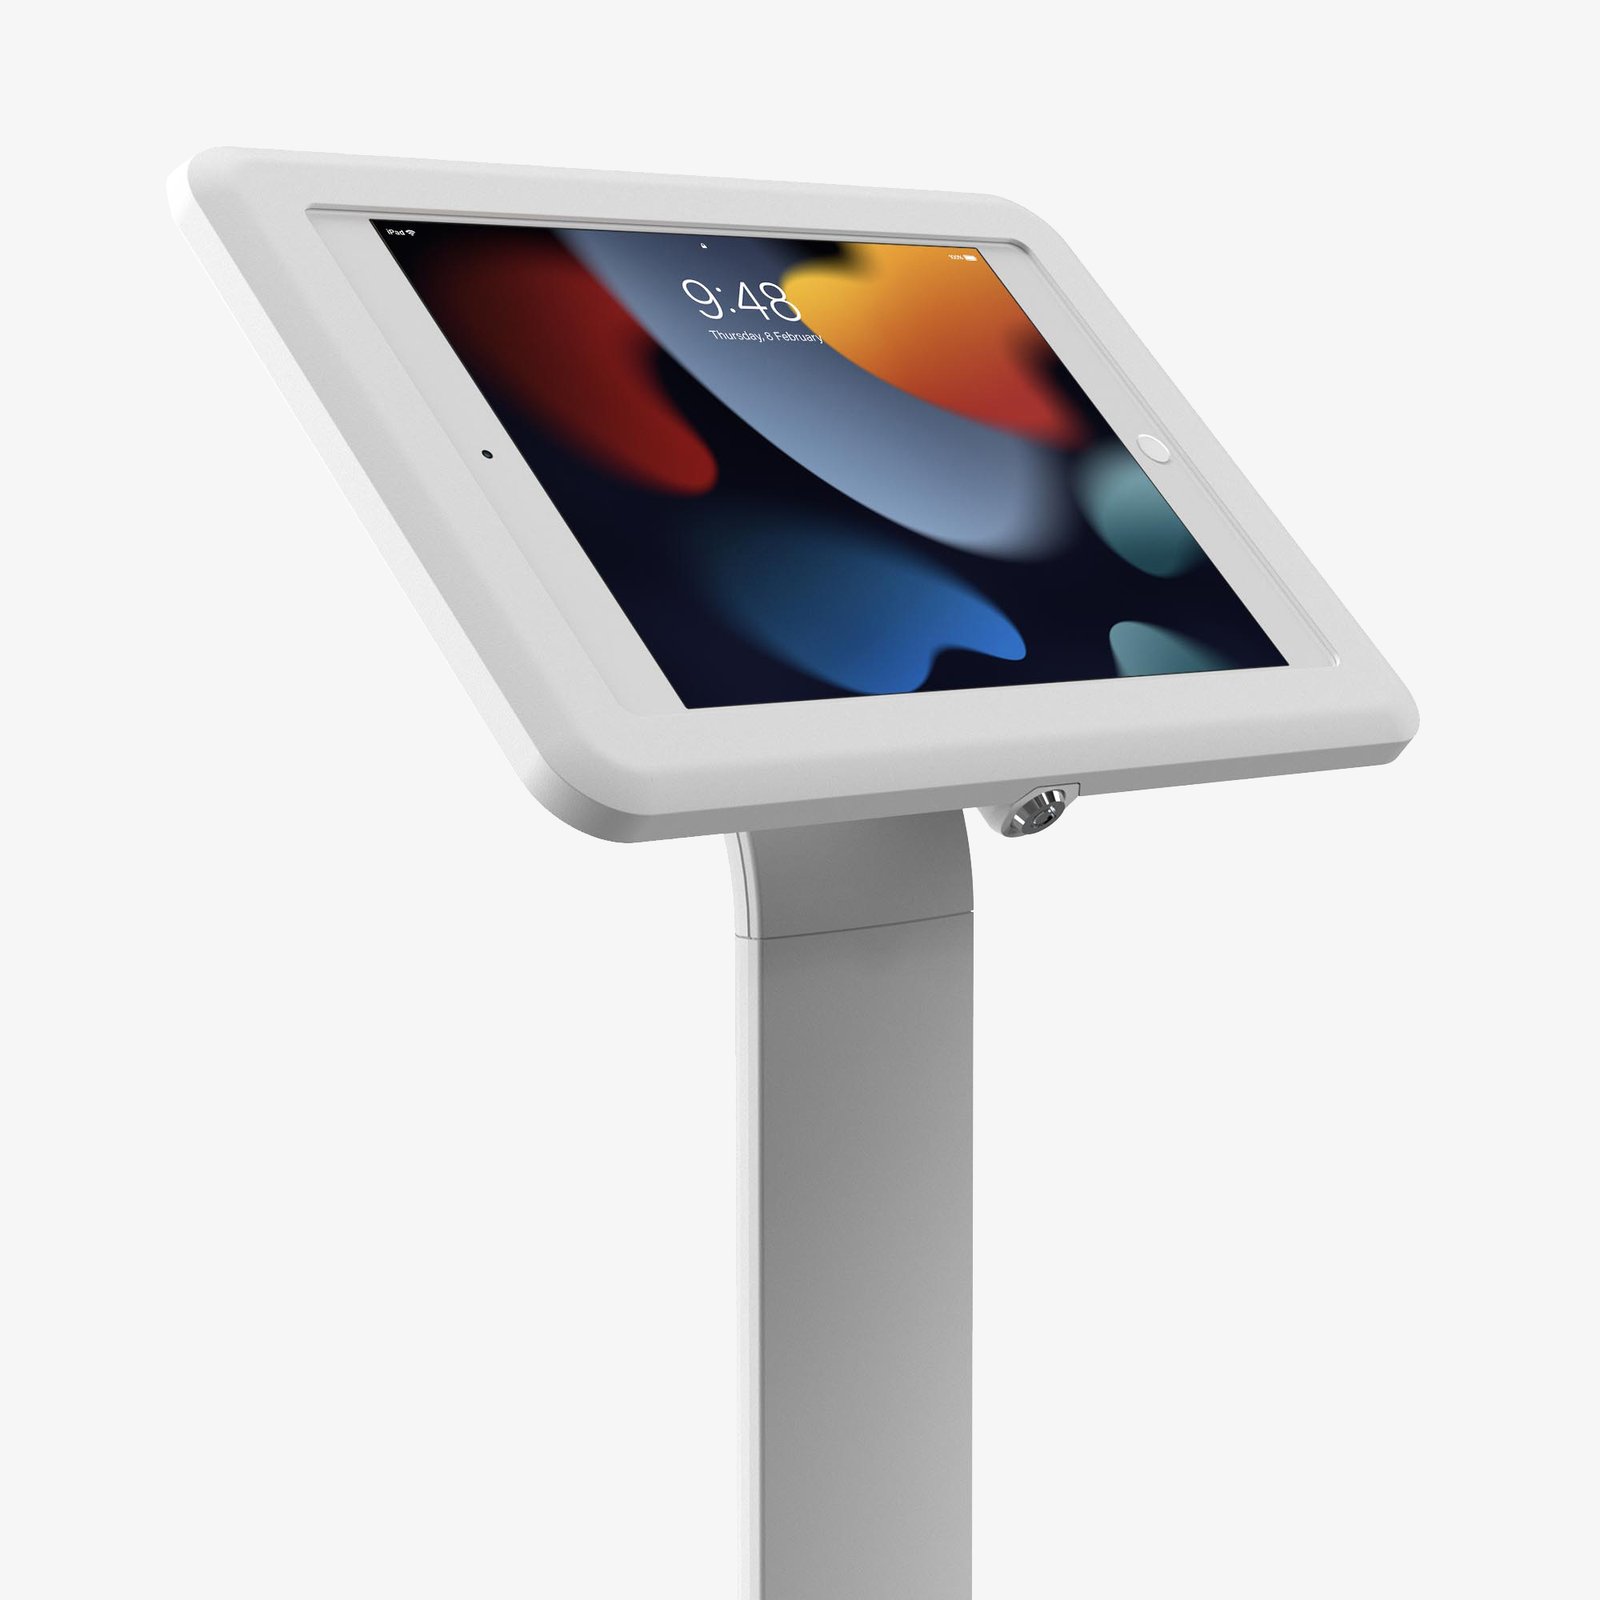 Bosstab Elite Evo X Floor Stand for iPads and Tablets